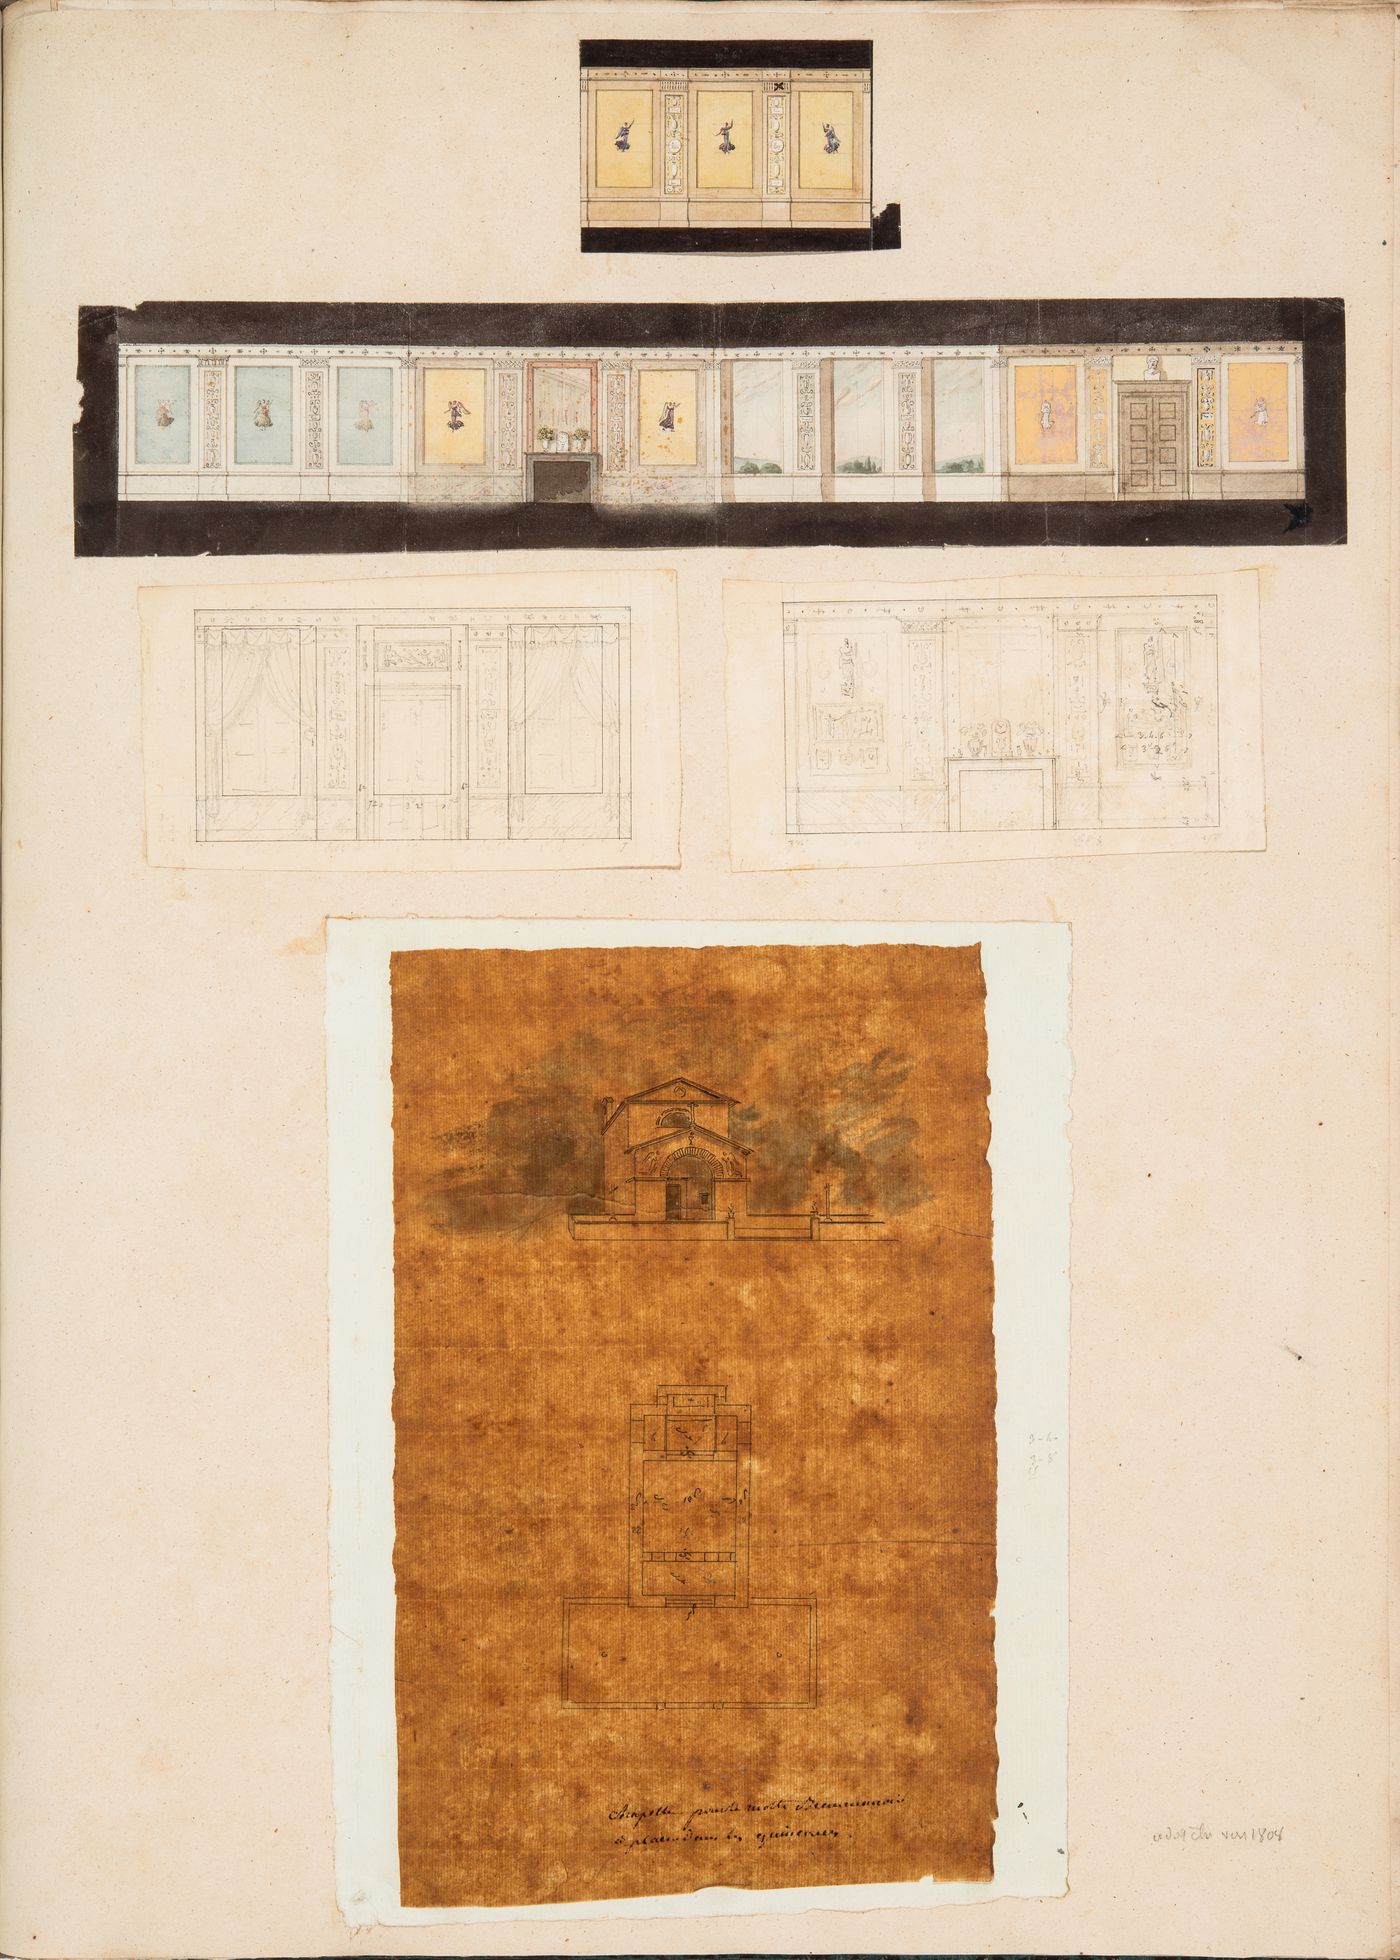 Project for a château for M. de Lorgeril, Motte Beaumanoir: Elevations showing the interior decoration; Plan and perspective for a sepulchral chapel for the de Lorgeril family, Motte Beaumanoir